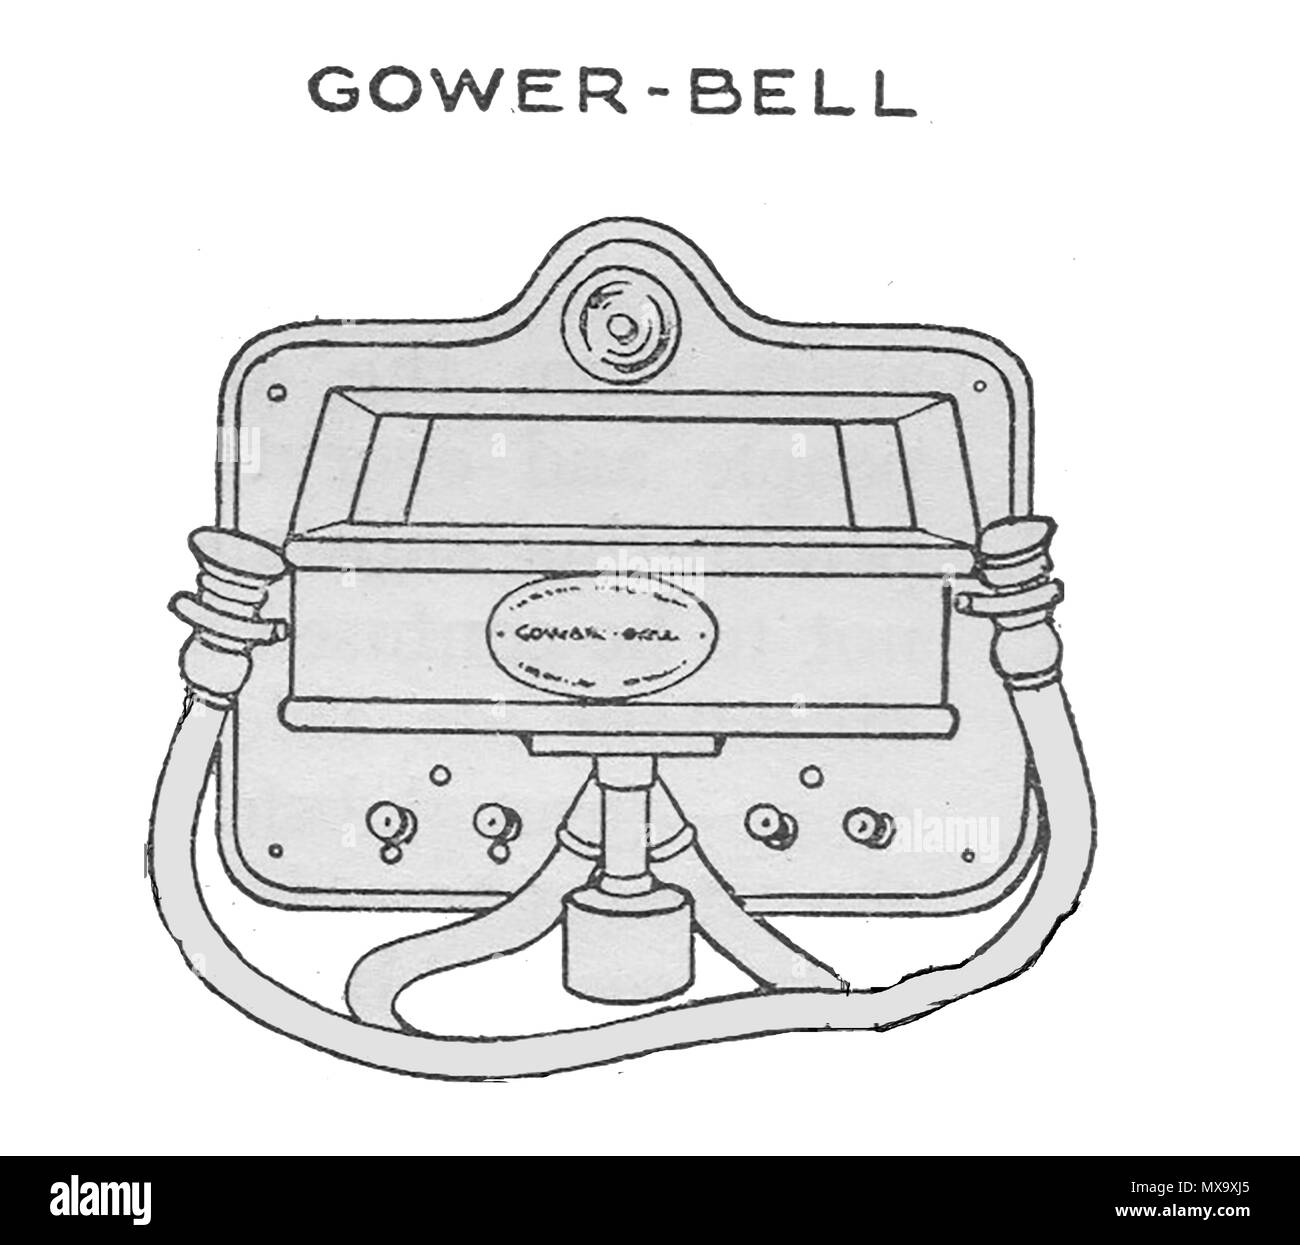 Early telephone equipment - A 1930's illustration of a Gower-Bell telephone device. Stock Photo